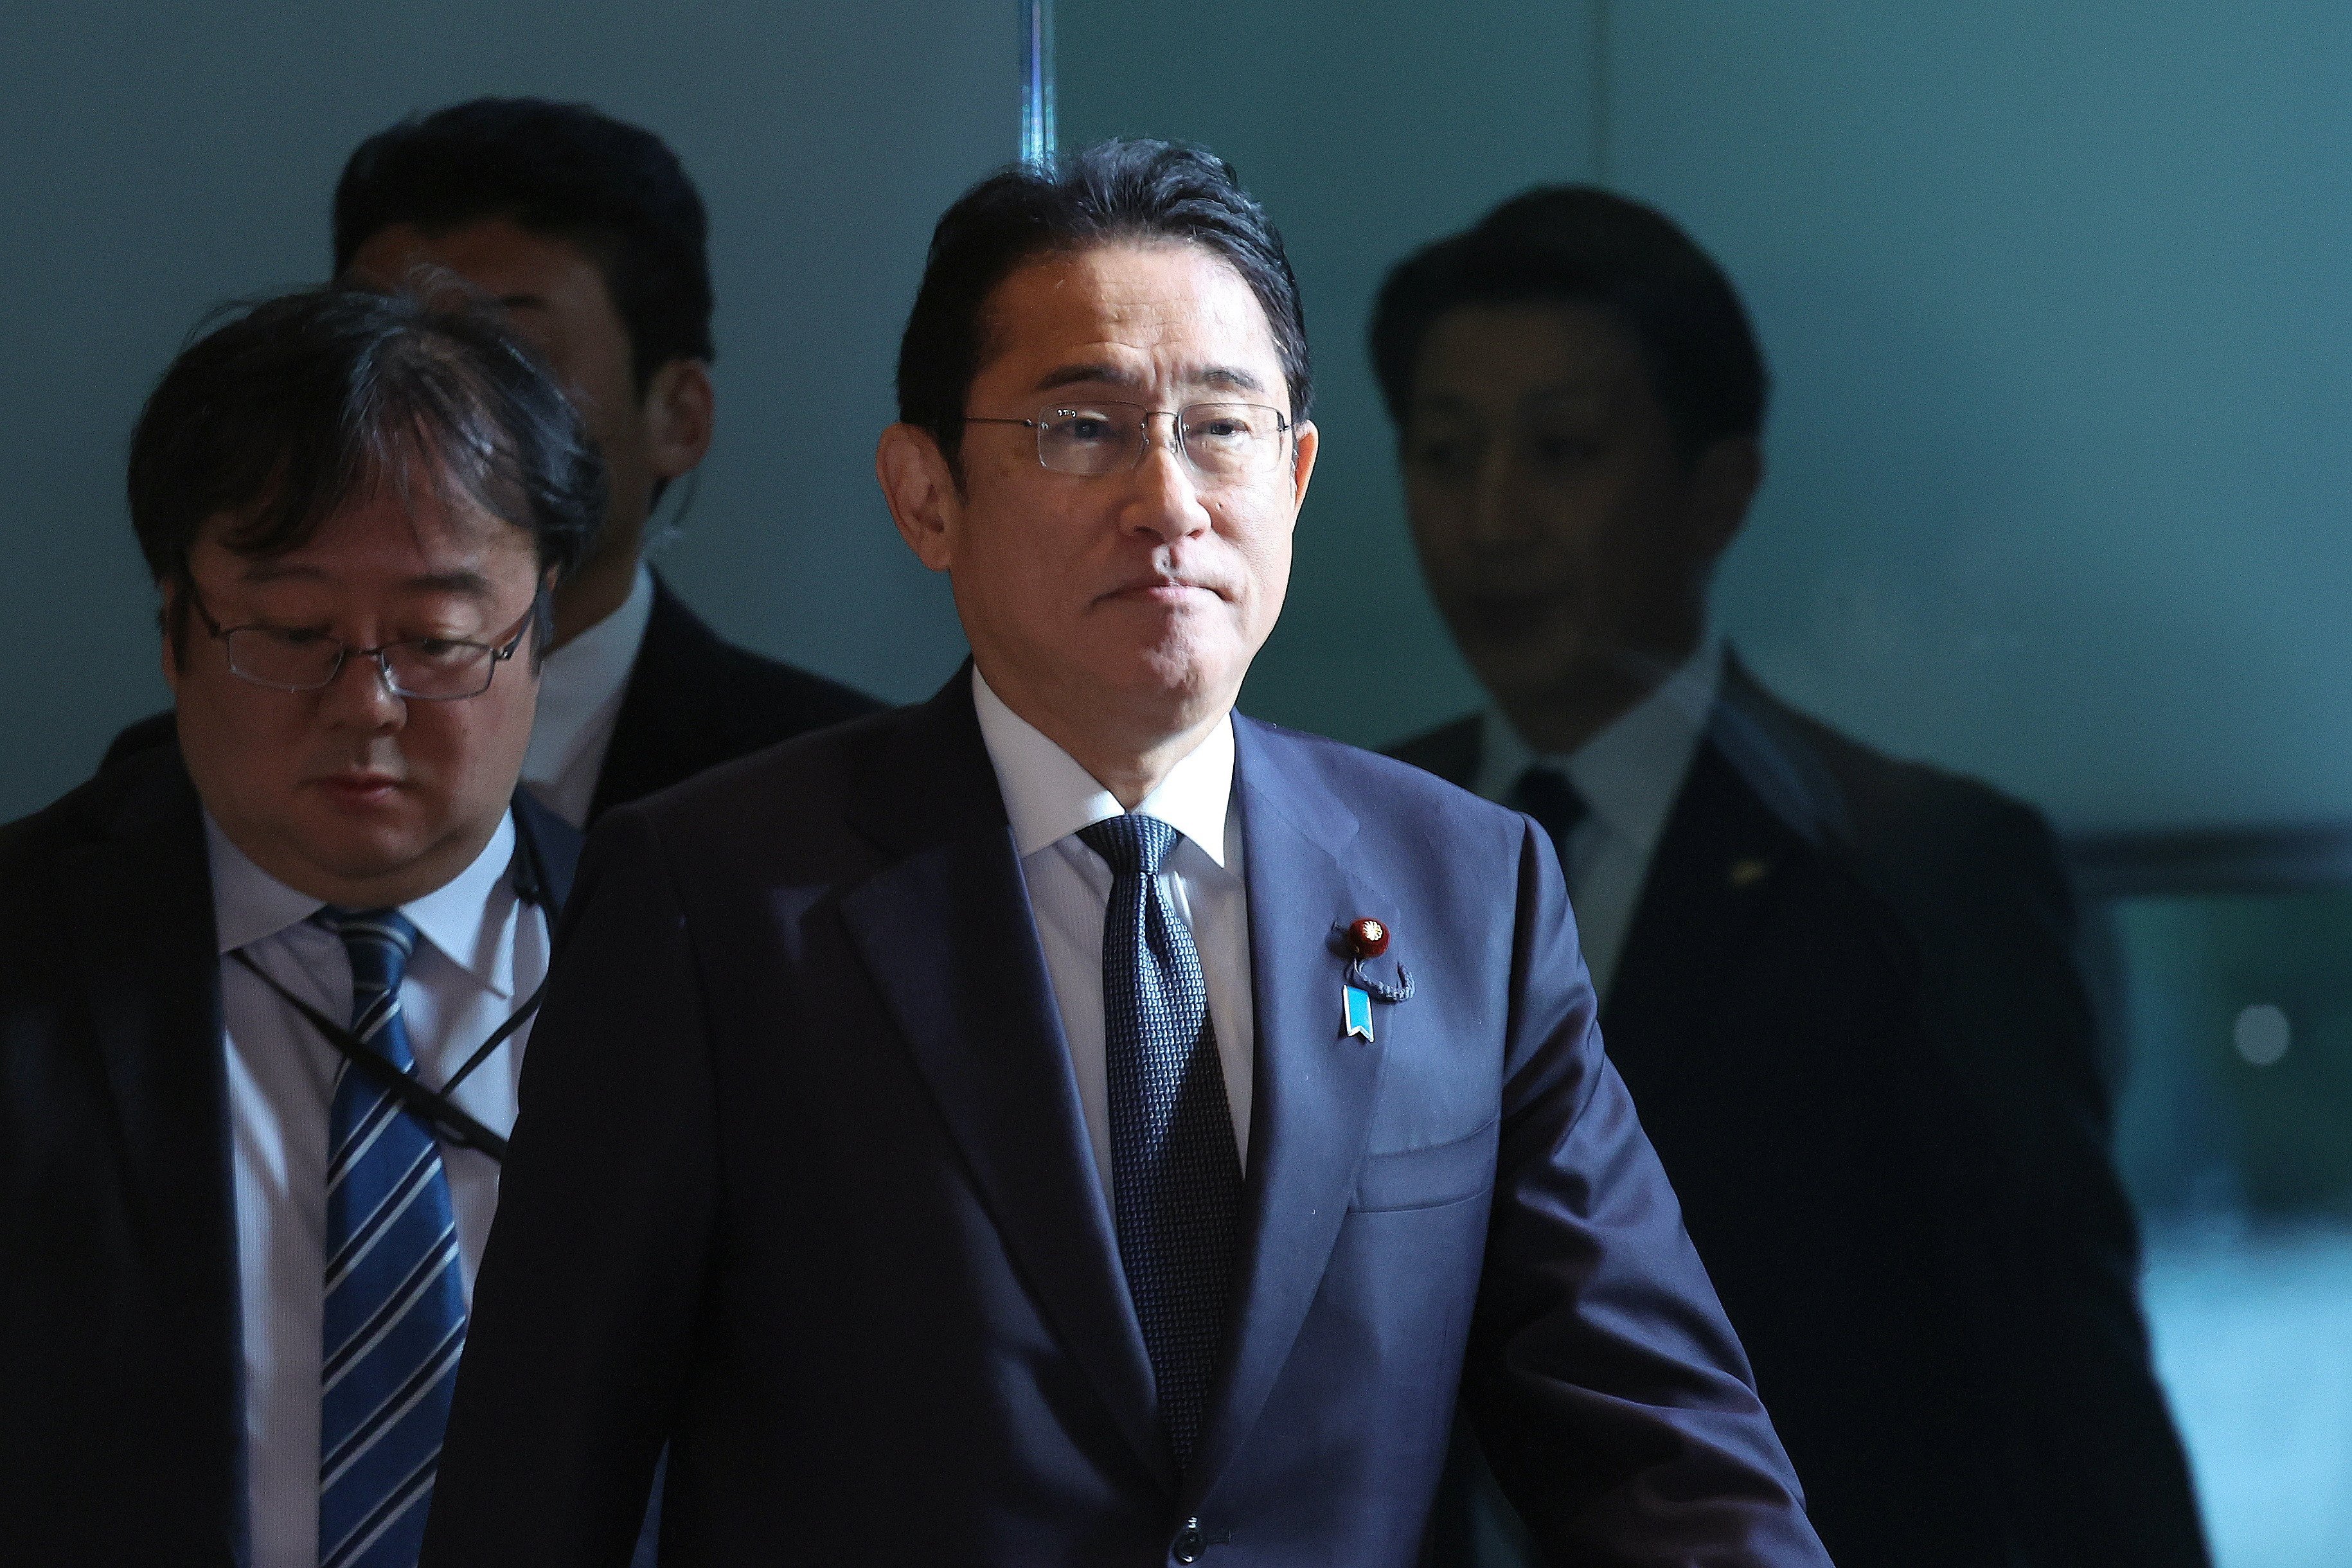 Japanese Prime Minister Fumio Kishida arrives at his official residence in Tokyo on December 6. Kishida’s dismal approval rating and inability to carry out reforms his party has promised have raised doubts about how long he can keep his premiership. Photo: EPA-EFE